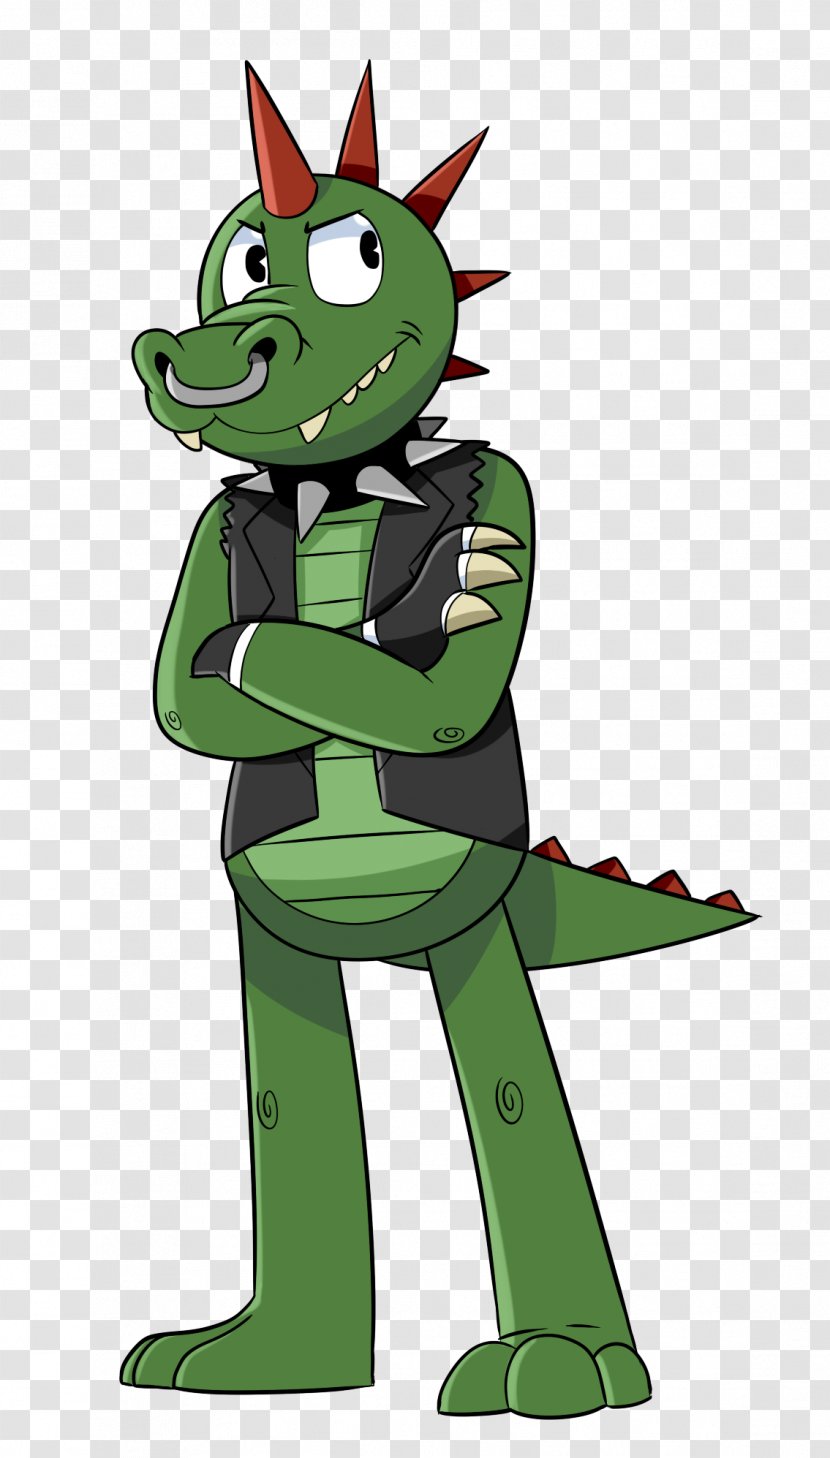 Crocodile Five Nights At Freddy's Animatronics Alligator - Mythical Creature Transparent PNG